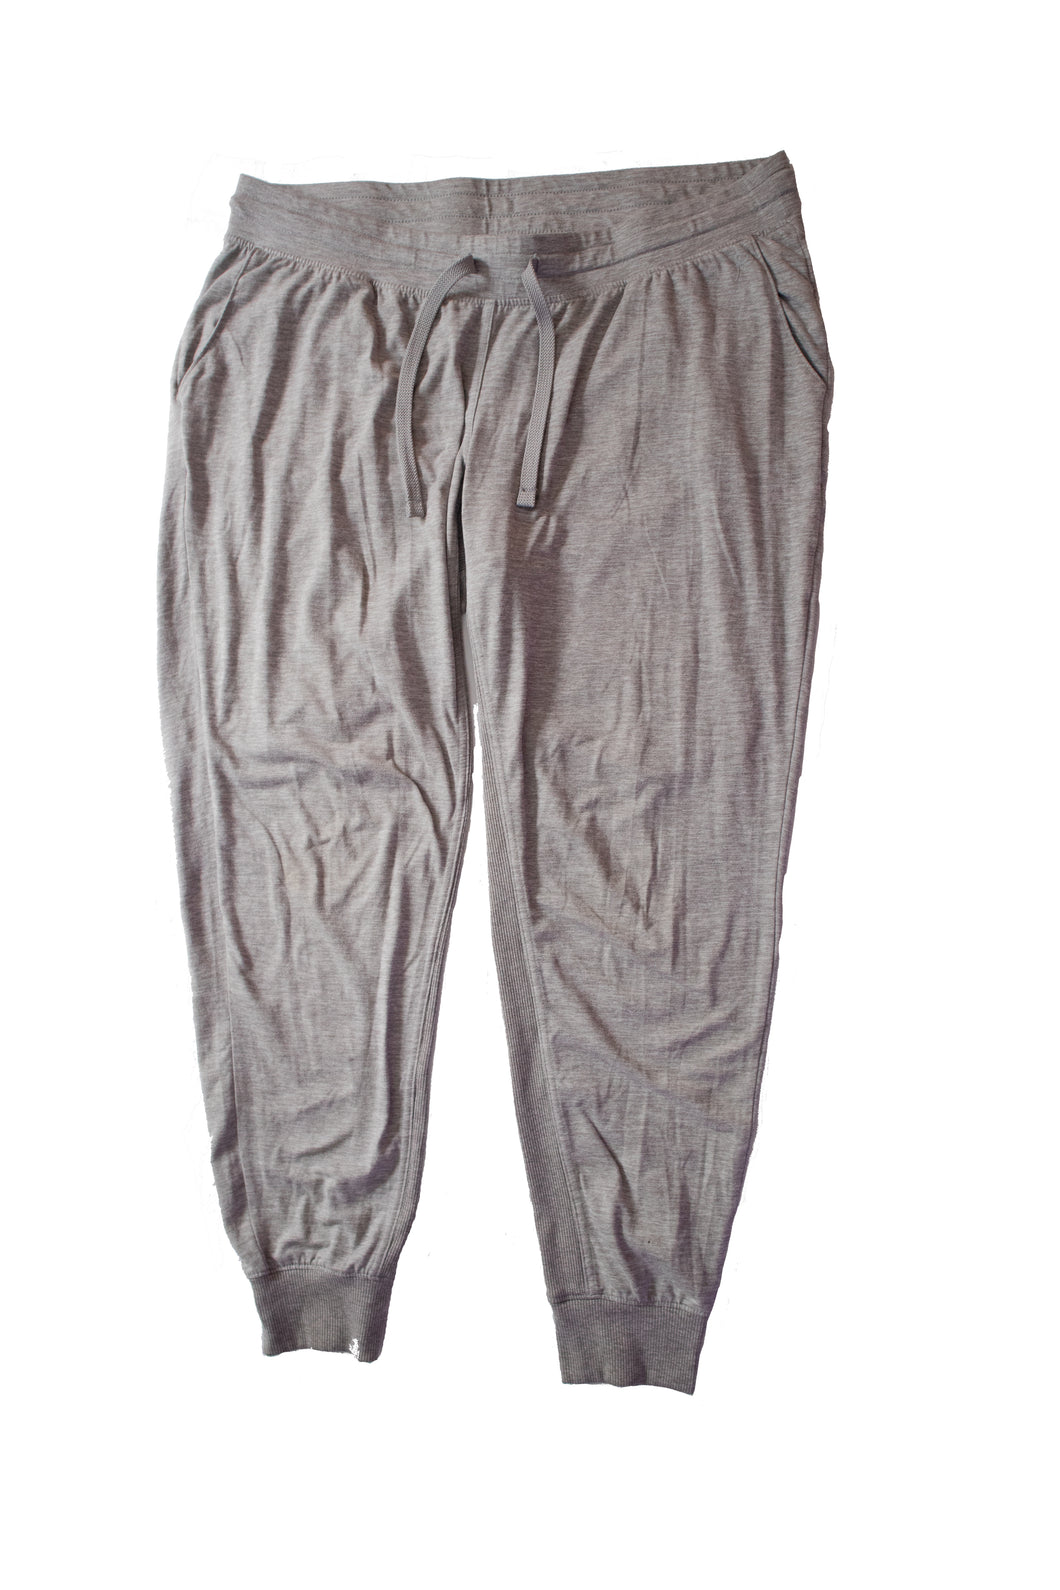 Gap Maternity Joggers in Grey Lounge Pregnant Pregnancy comfortable